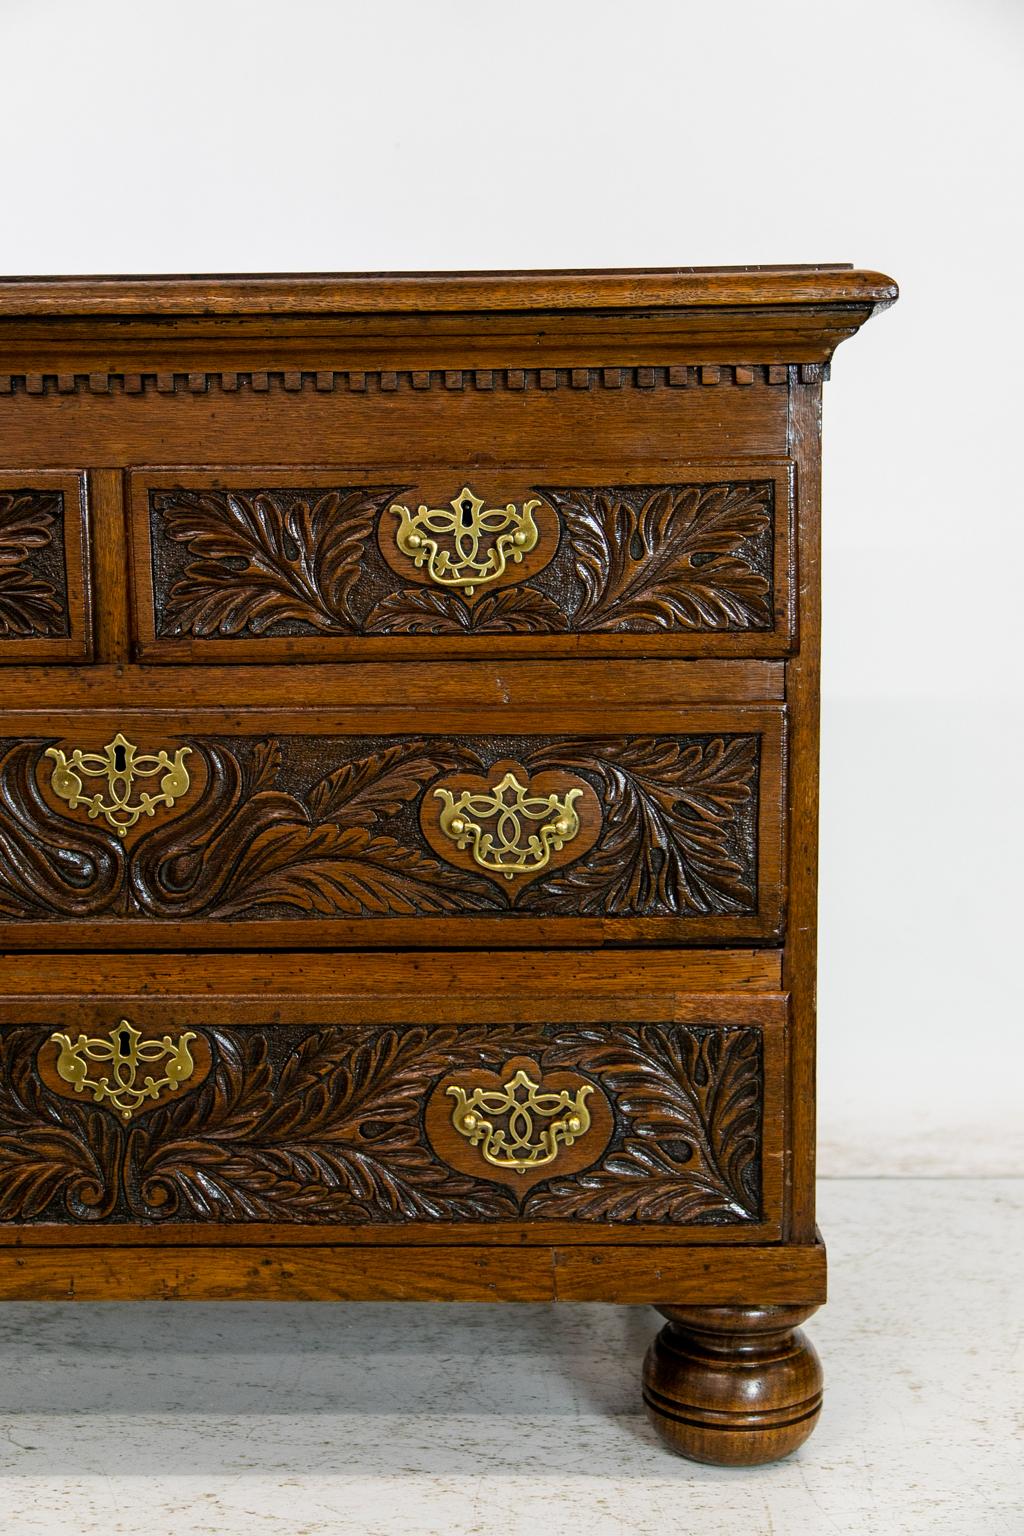 English Oak Carved Four Drawer Chest, has a dentil cornice and frieze. The drawers depict carved leaves and other foliate patterns. It retains one of its original locks for the top right hand drawer.